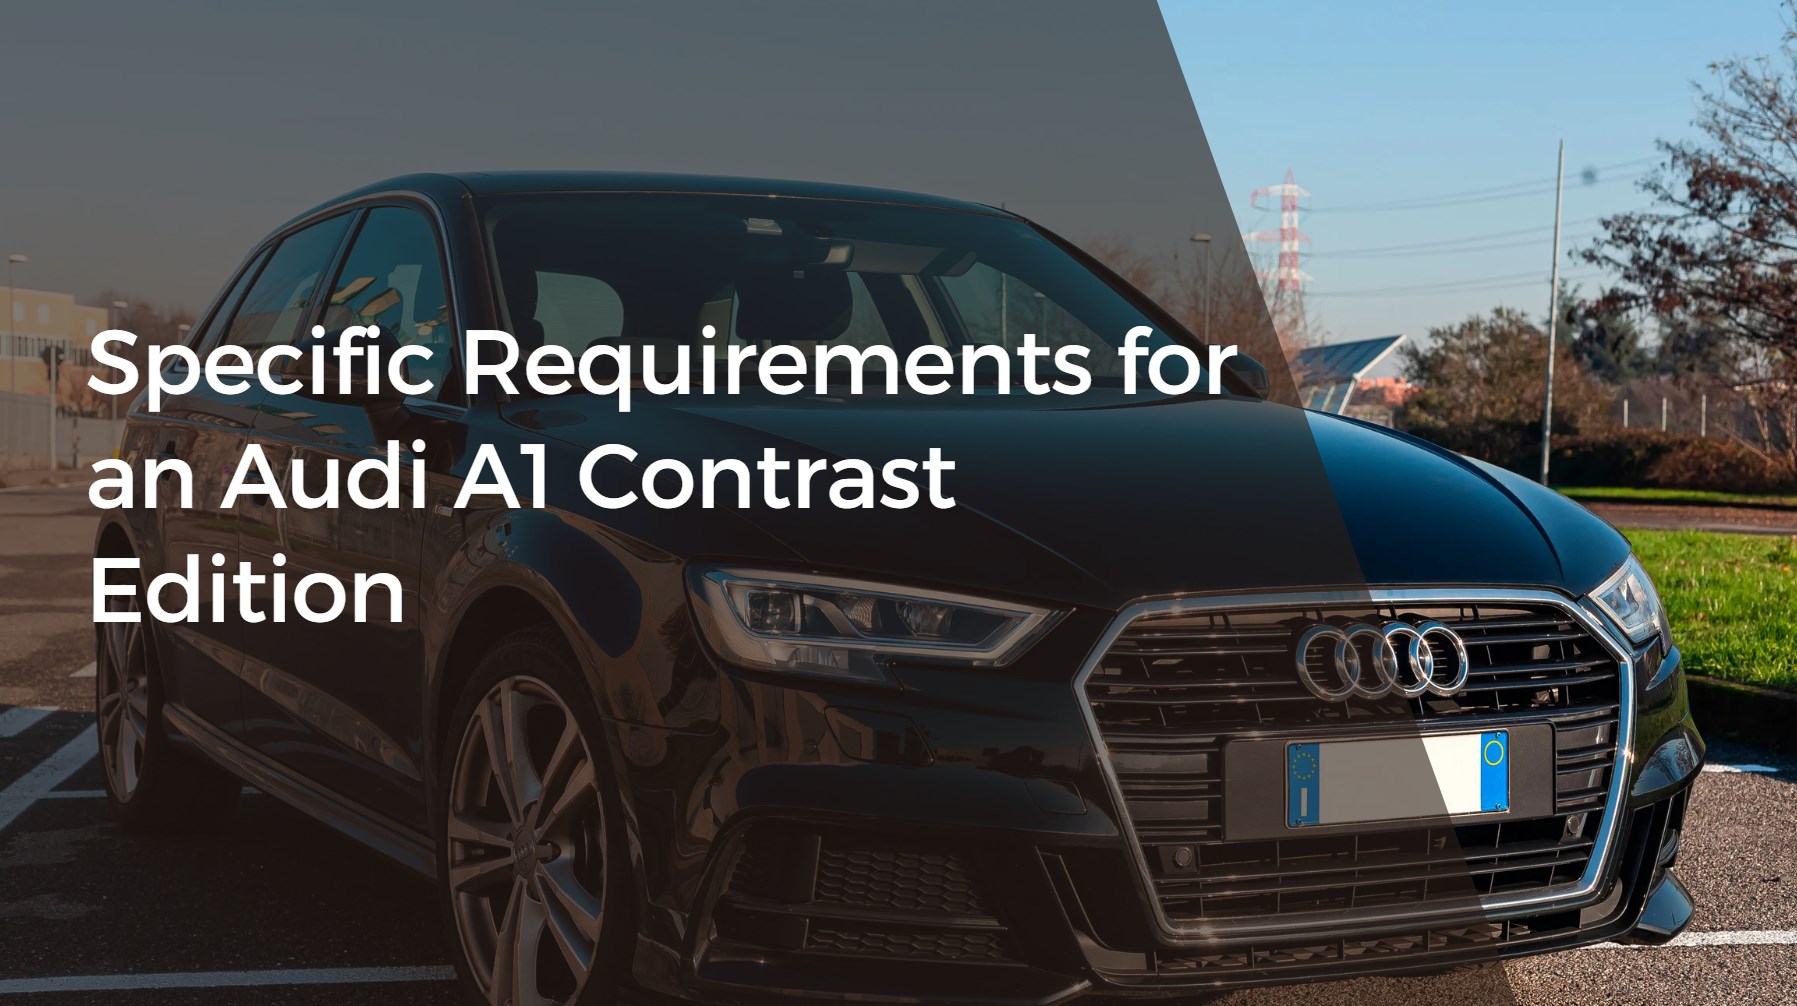 Specific Requirements for an Audi A1 Contrast Edition